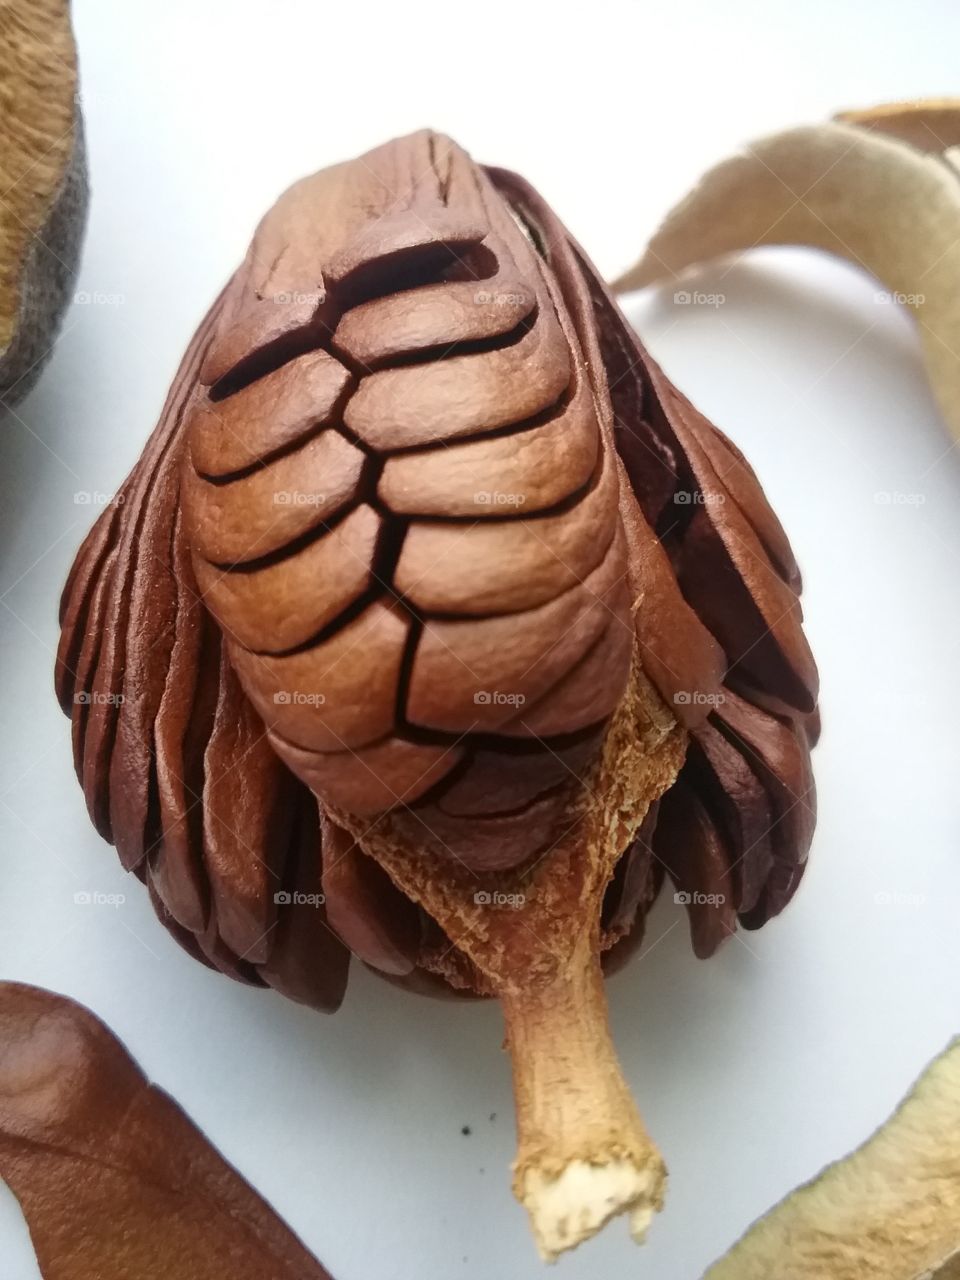 West Indian Mahogany seeds in pod